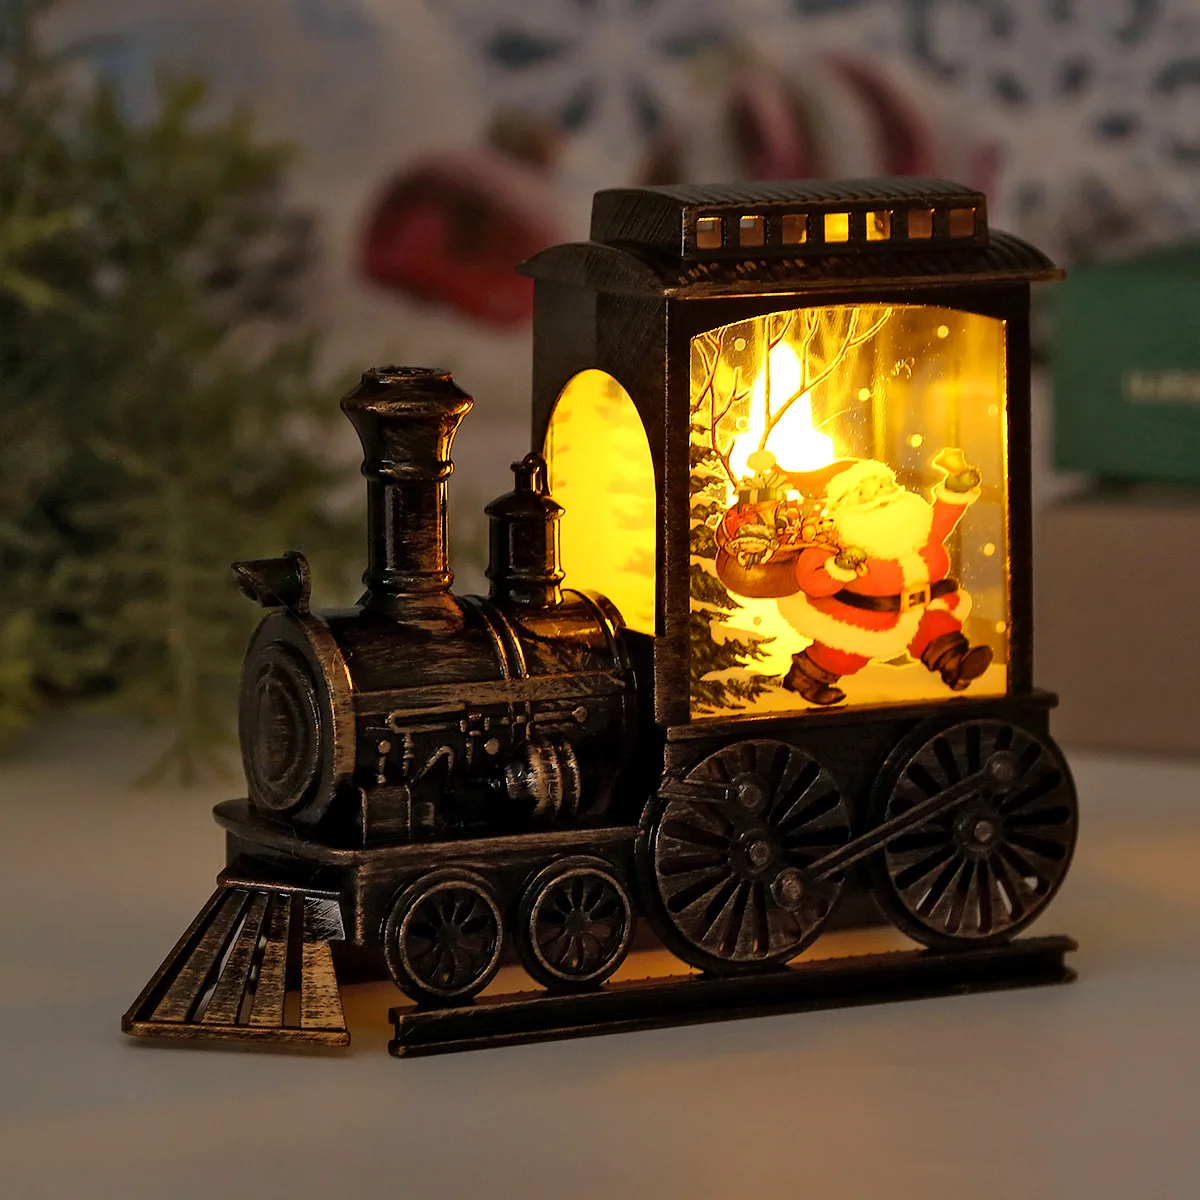 Vintage Portable Train Christmas LED Night Lights Battery Powered Indoor Outdoor Hanging Lanterns Festive Party Decoration